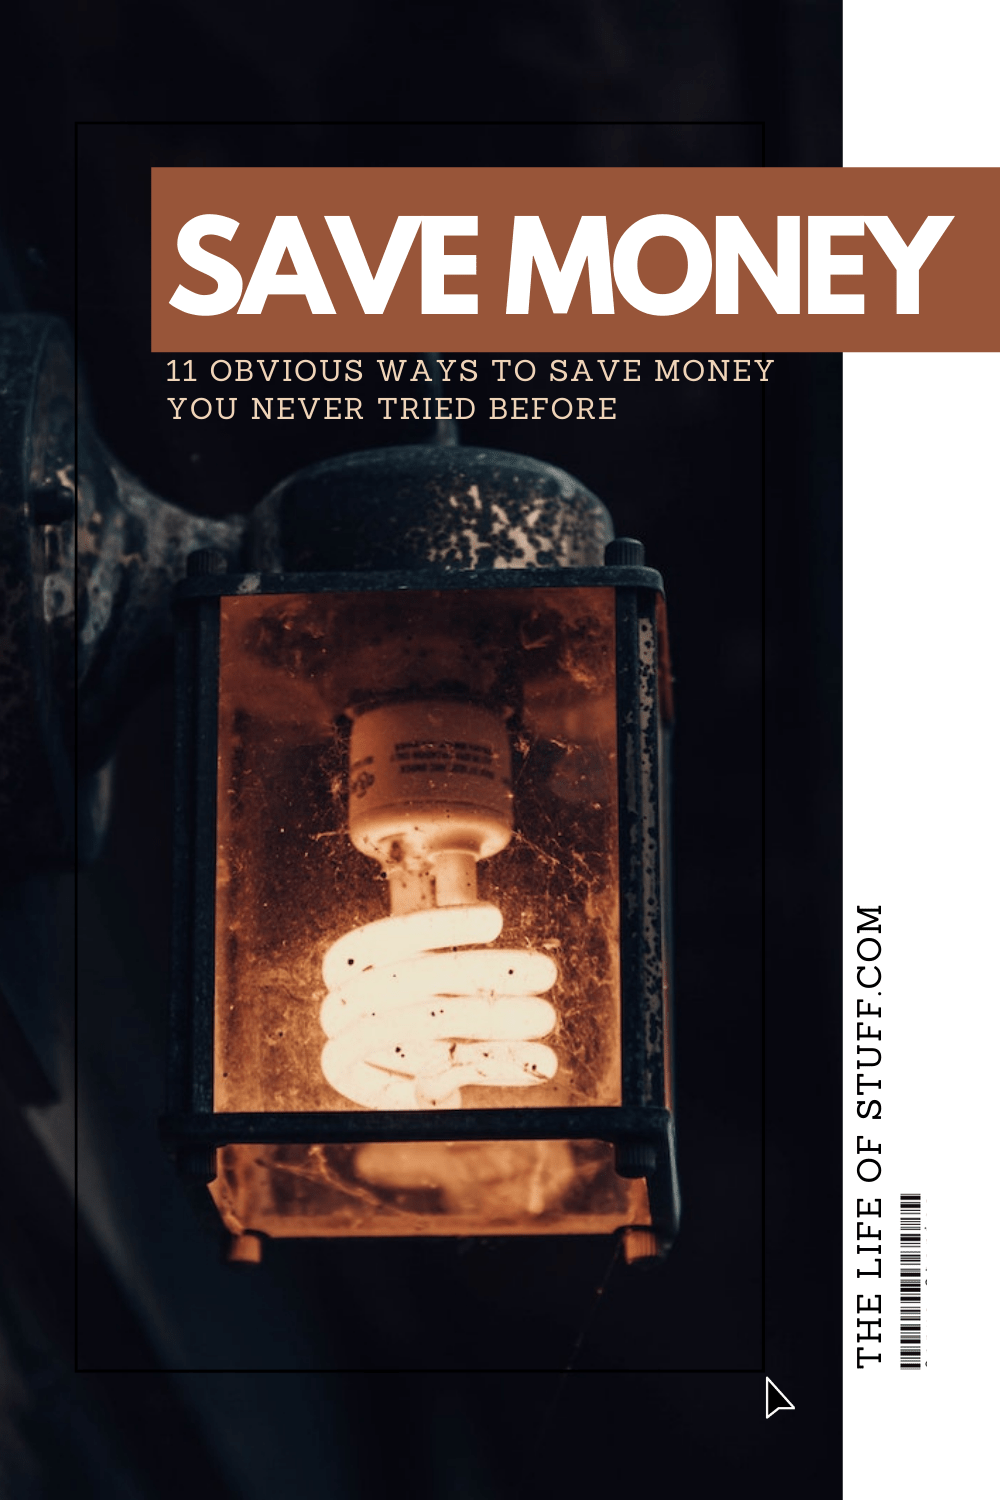 11 Obvious Ways to Save Money You Never Tried Before - The Life of Stuff